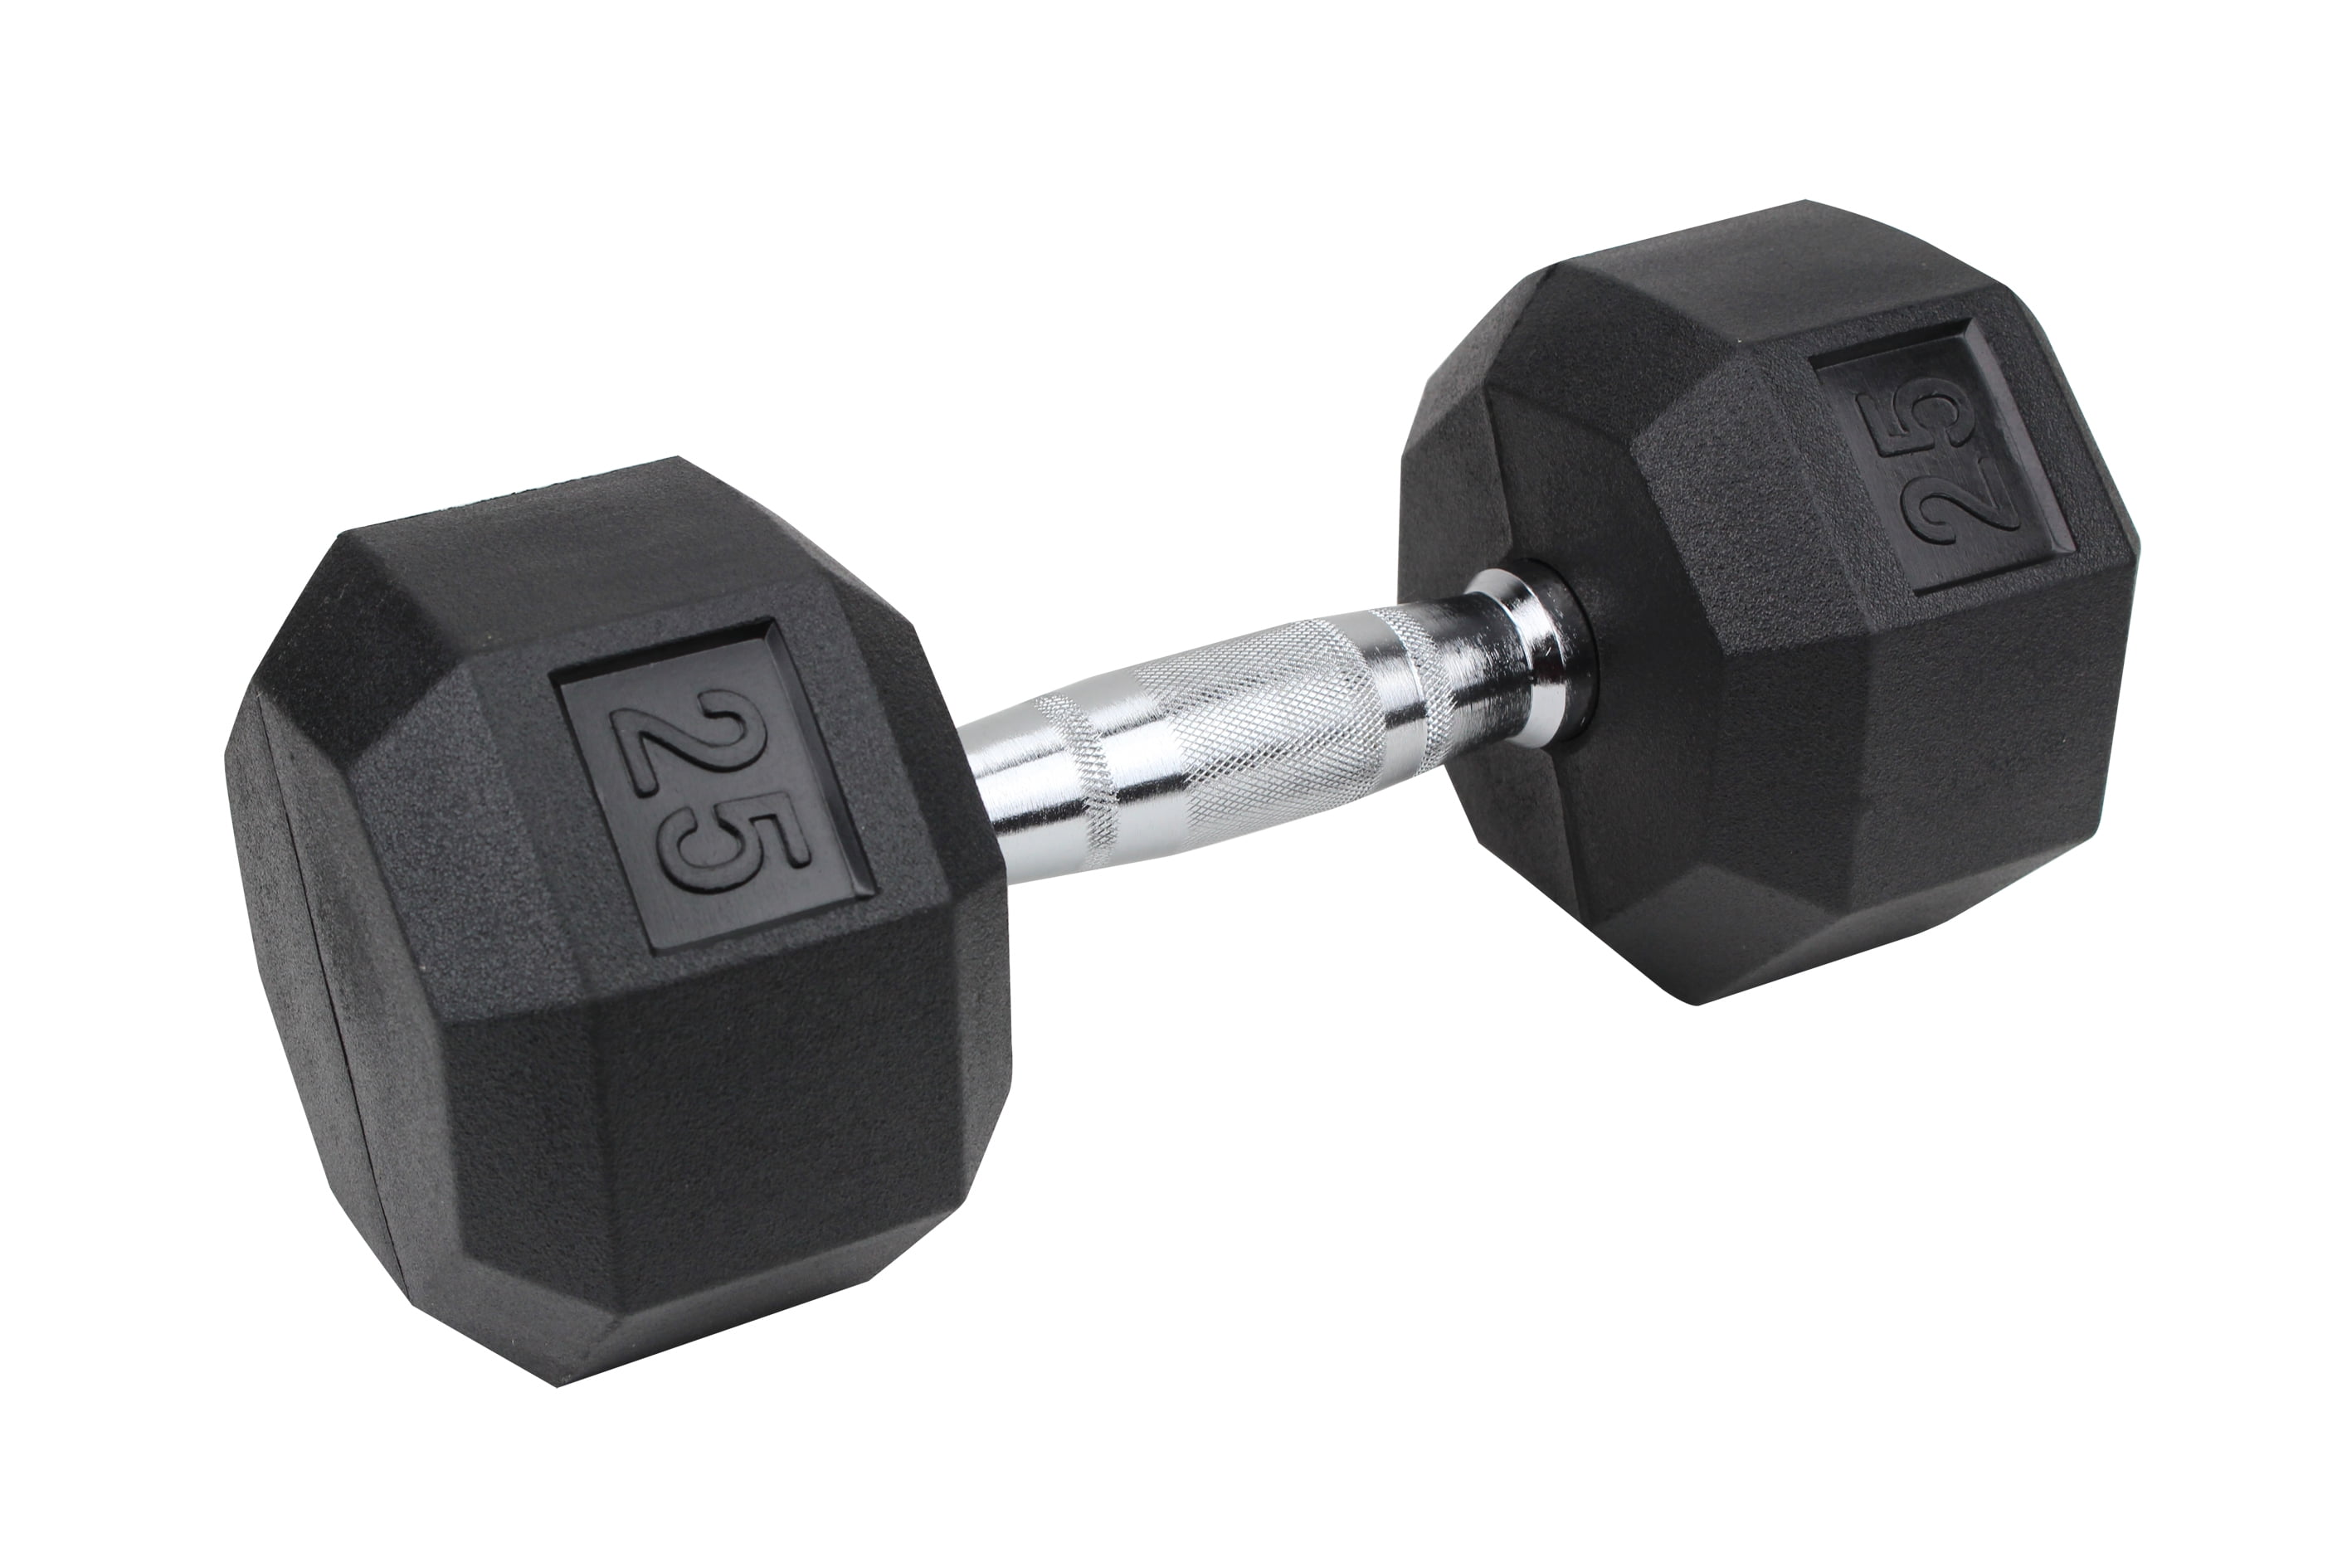 Pair of Rubber Coated Hex Dumbbell Hand Weight Set 5 lb to 50 Pound 